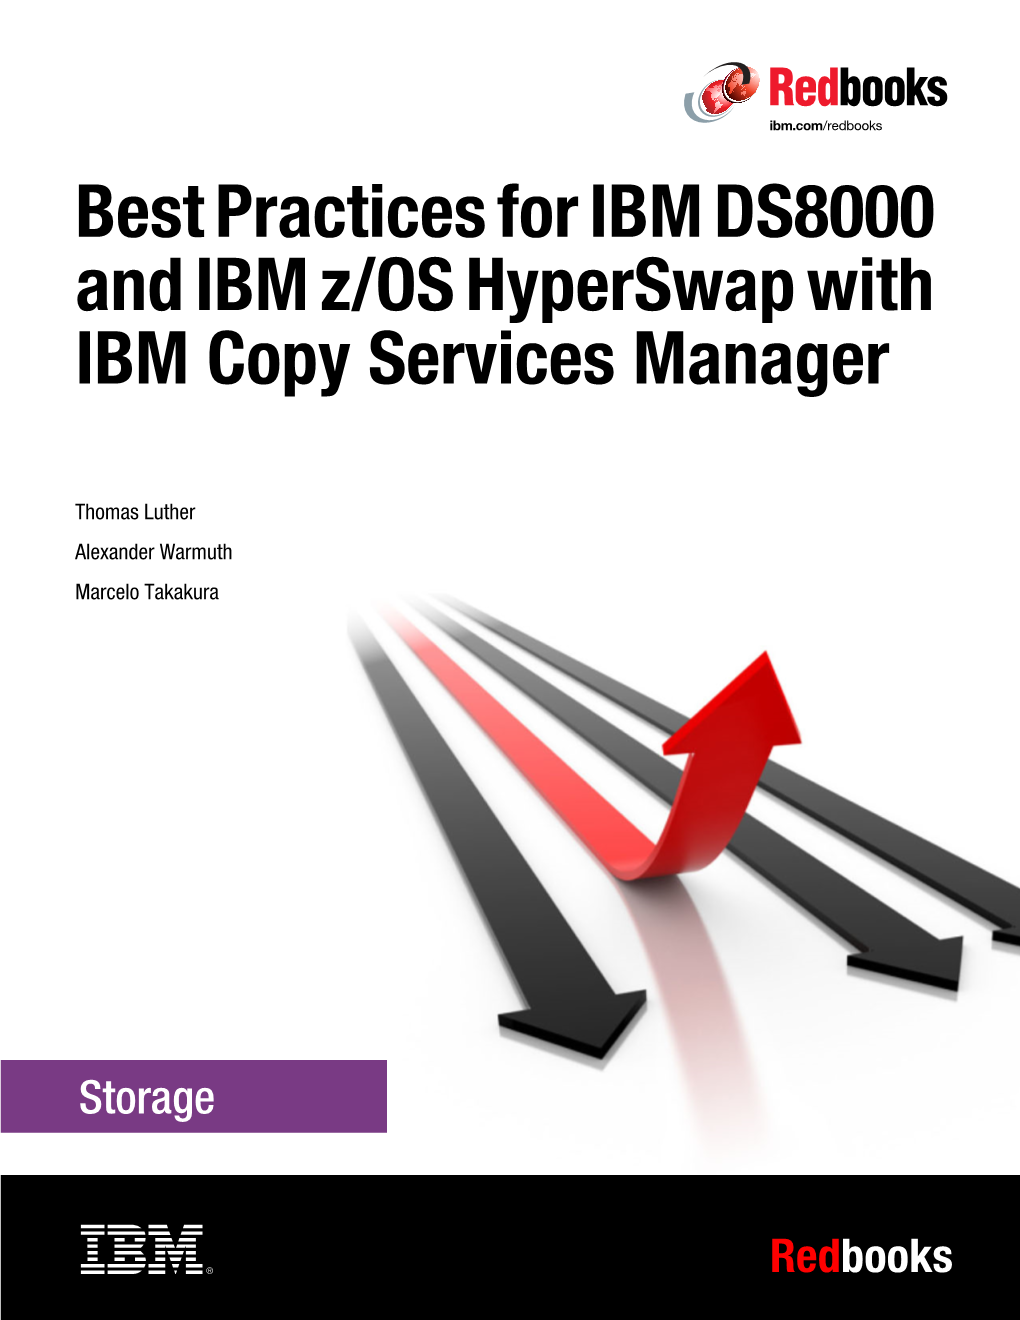 Best Practices for IBM DS8000 and IBM Z/OS Hyperswap with IBM Copy Services Manager